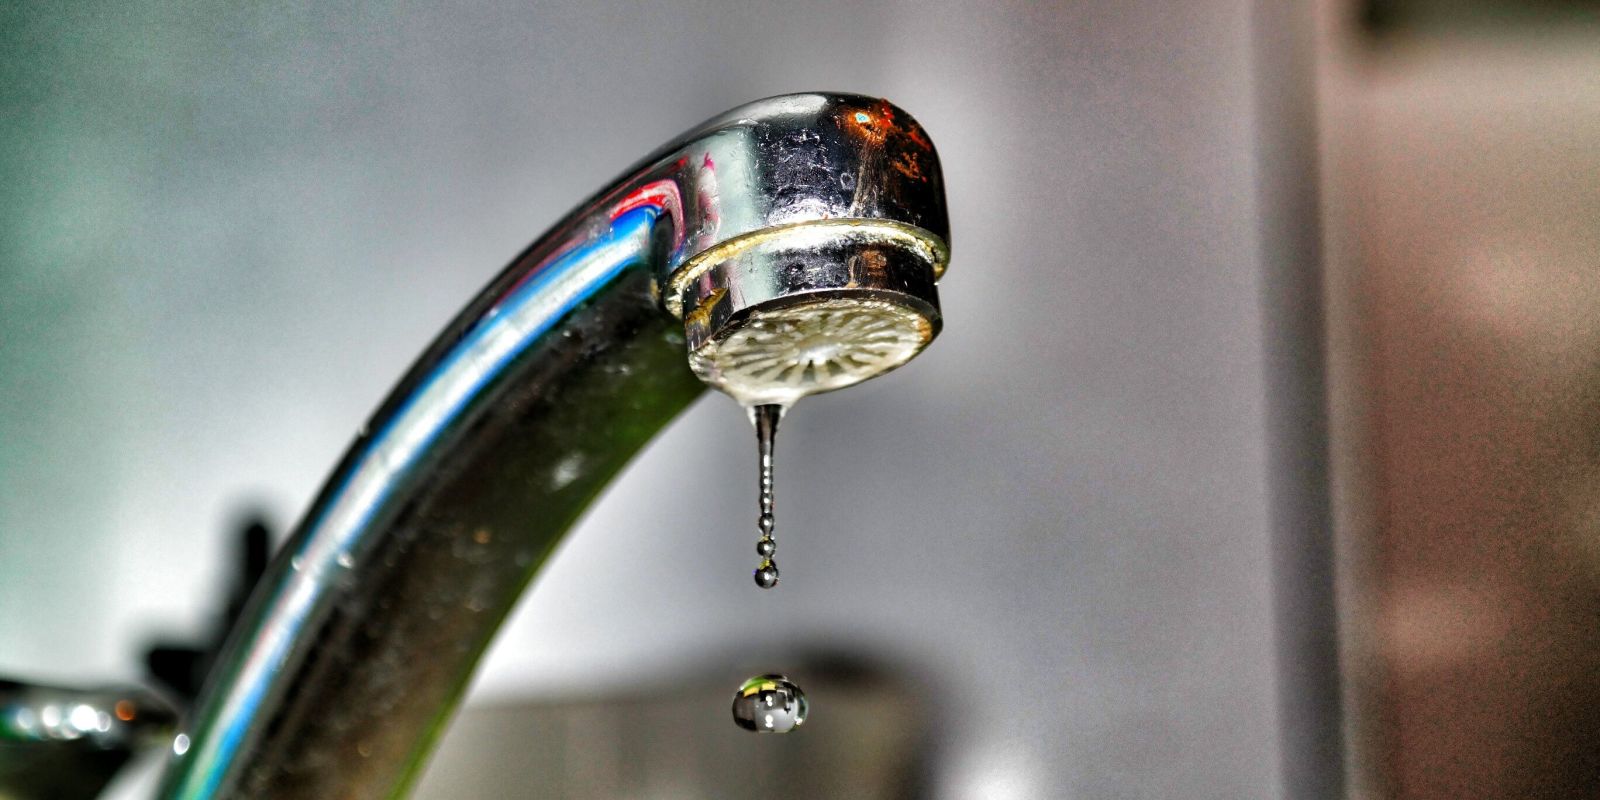 How To Fix A Leaky Tap In 5 Easy Steps